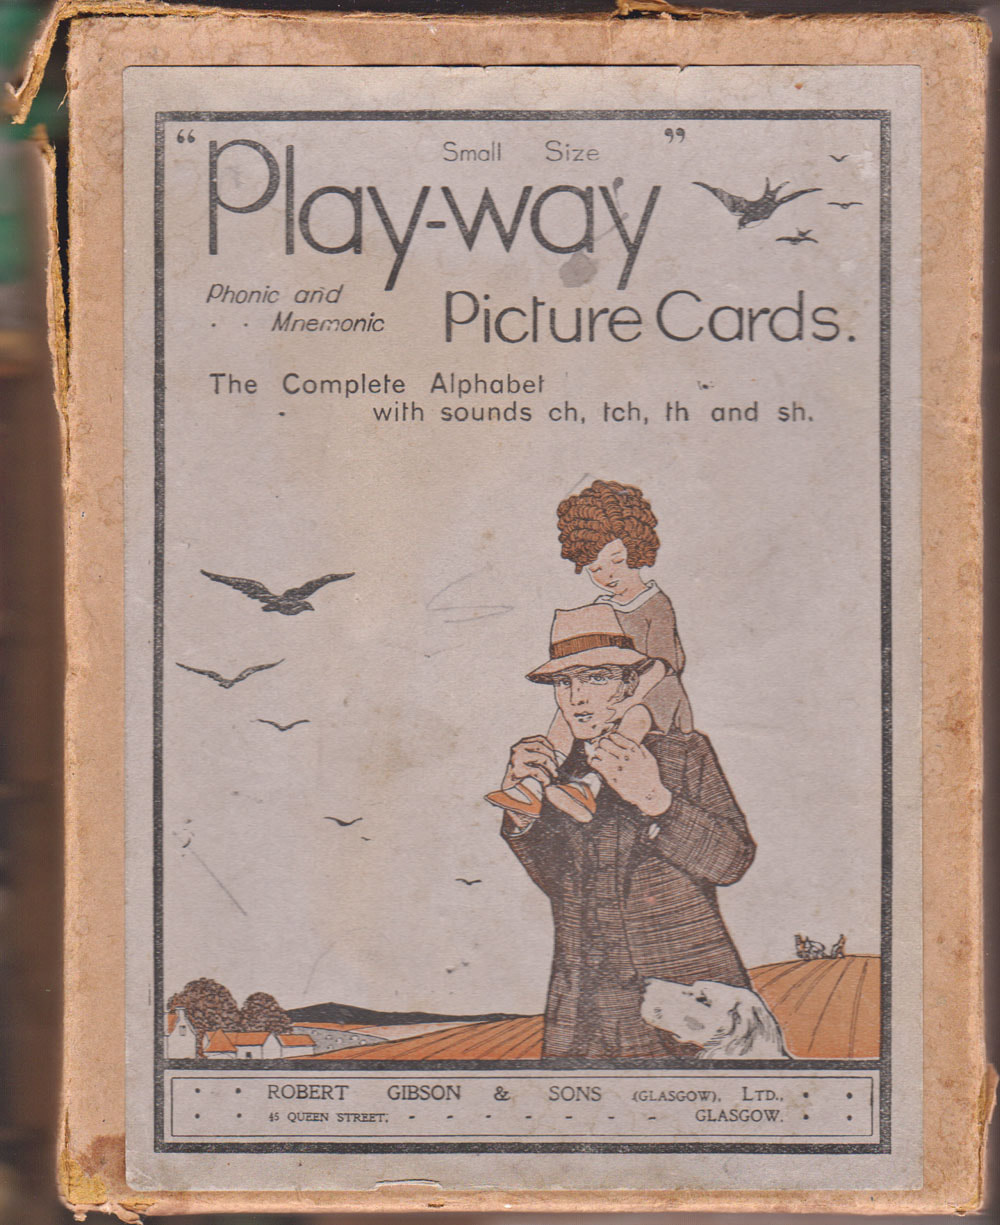 The box lid from the Play-way picture card set